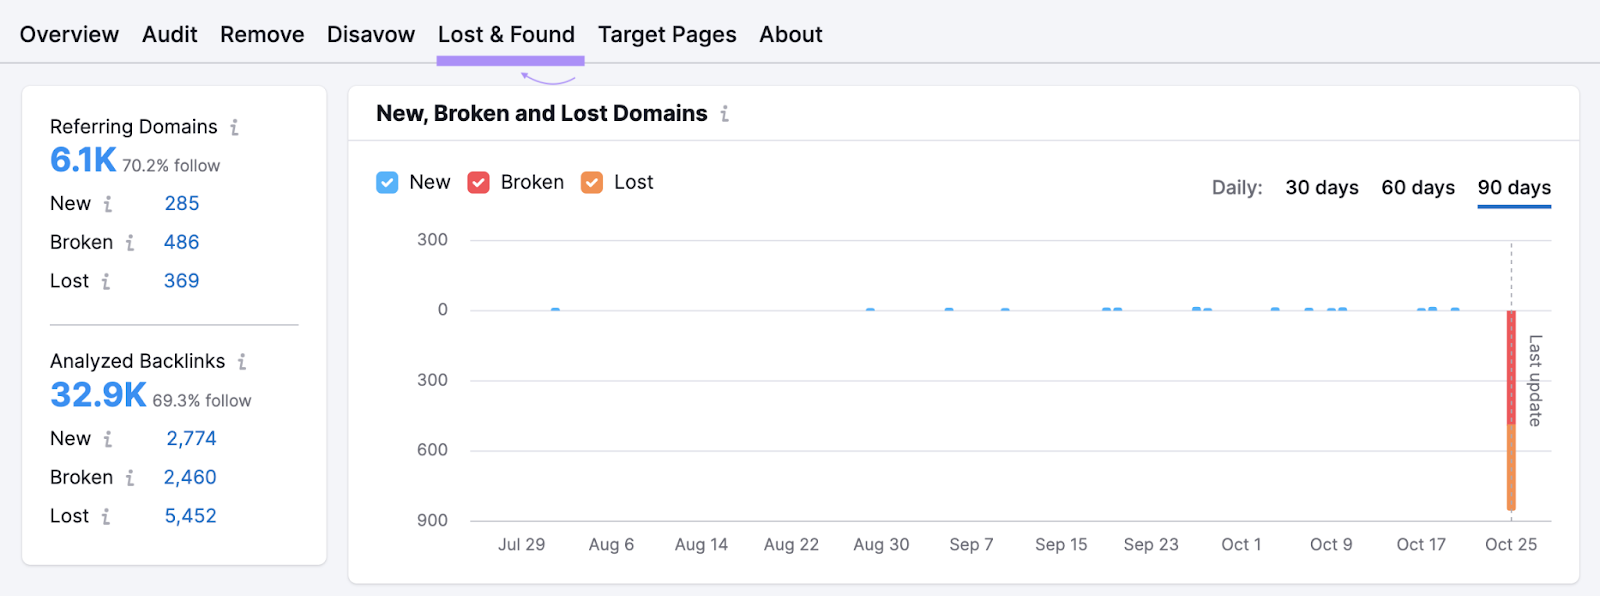 “Lost & Found” report in Backlink Audit tool